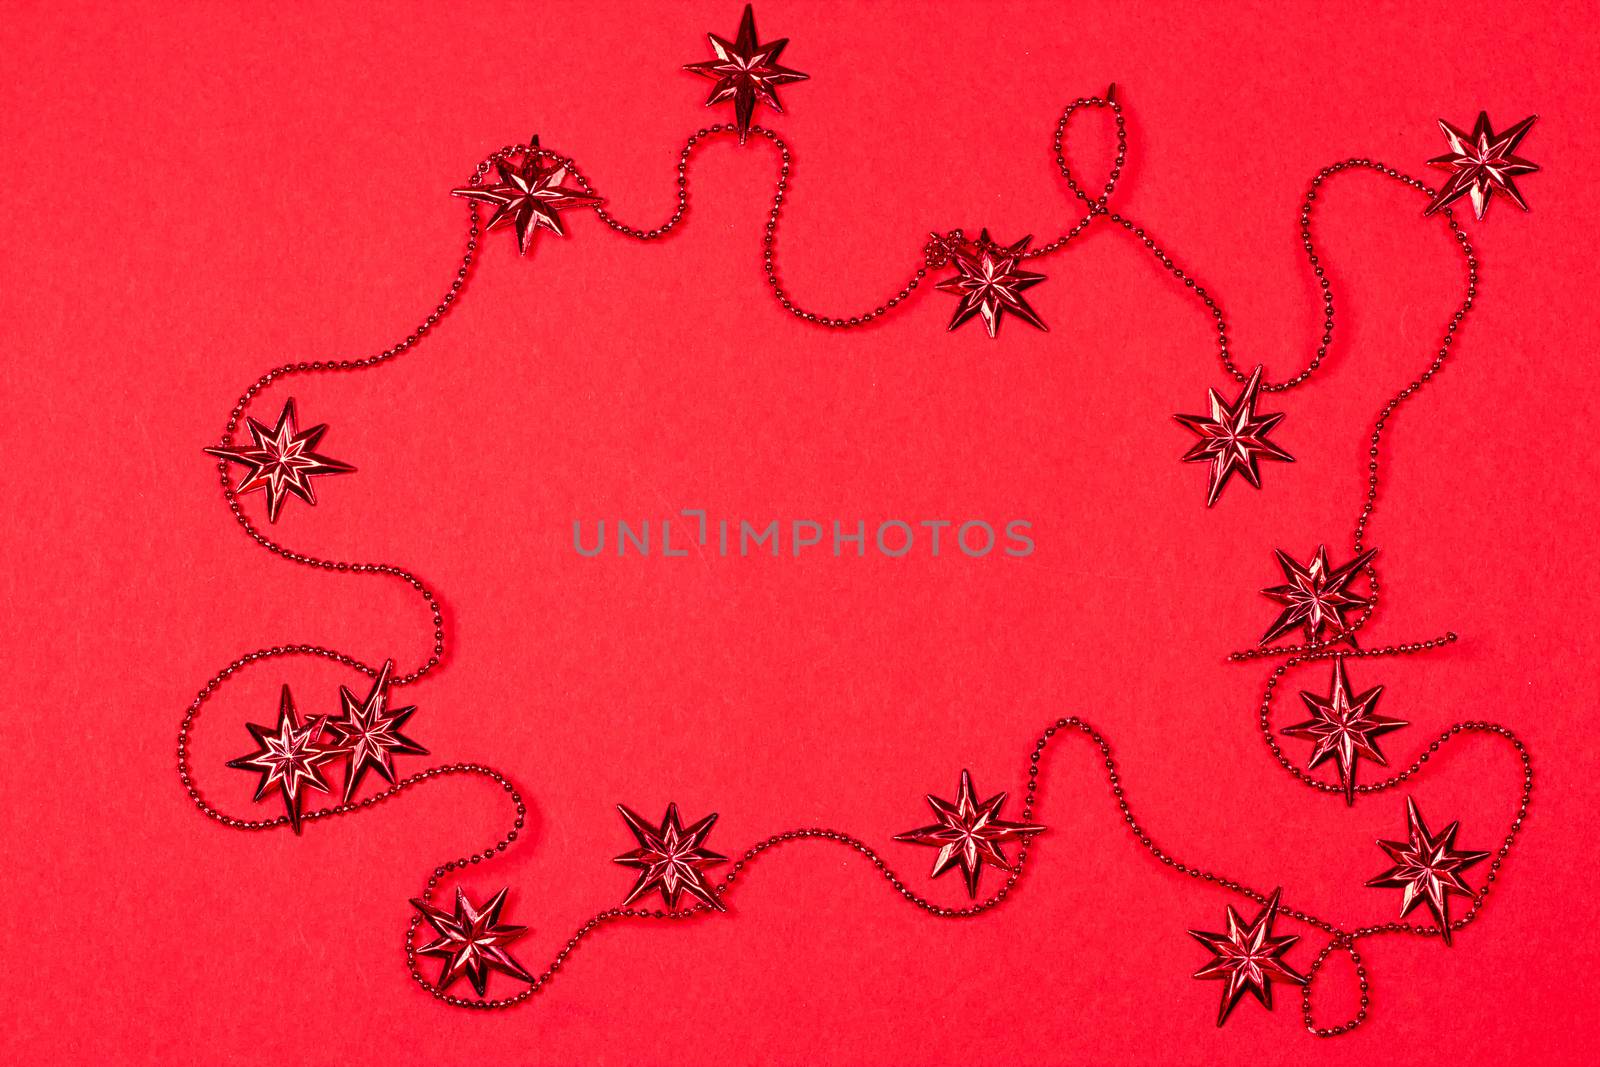 decorative festive garland on a red background